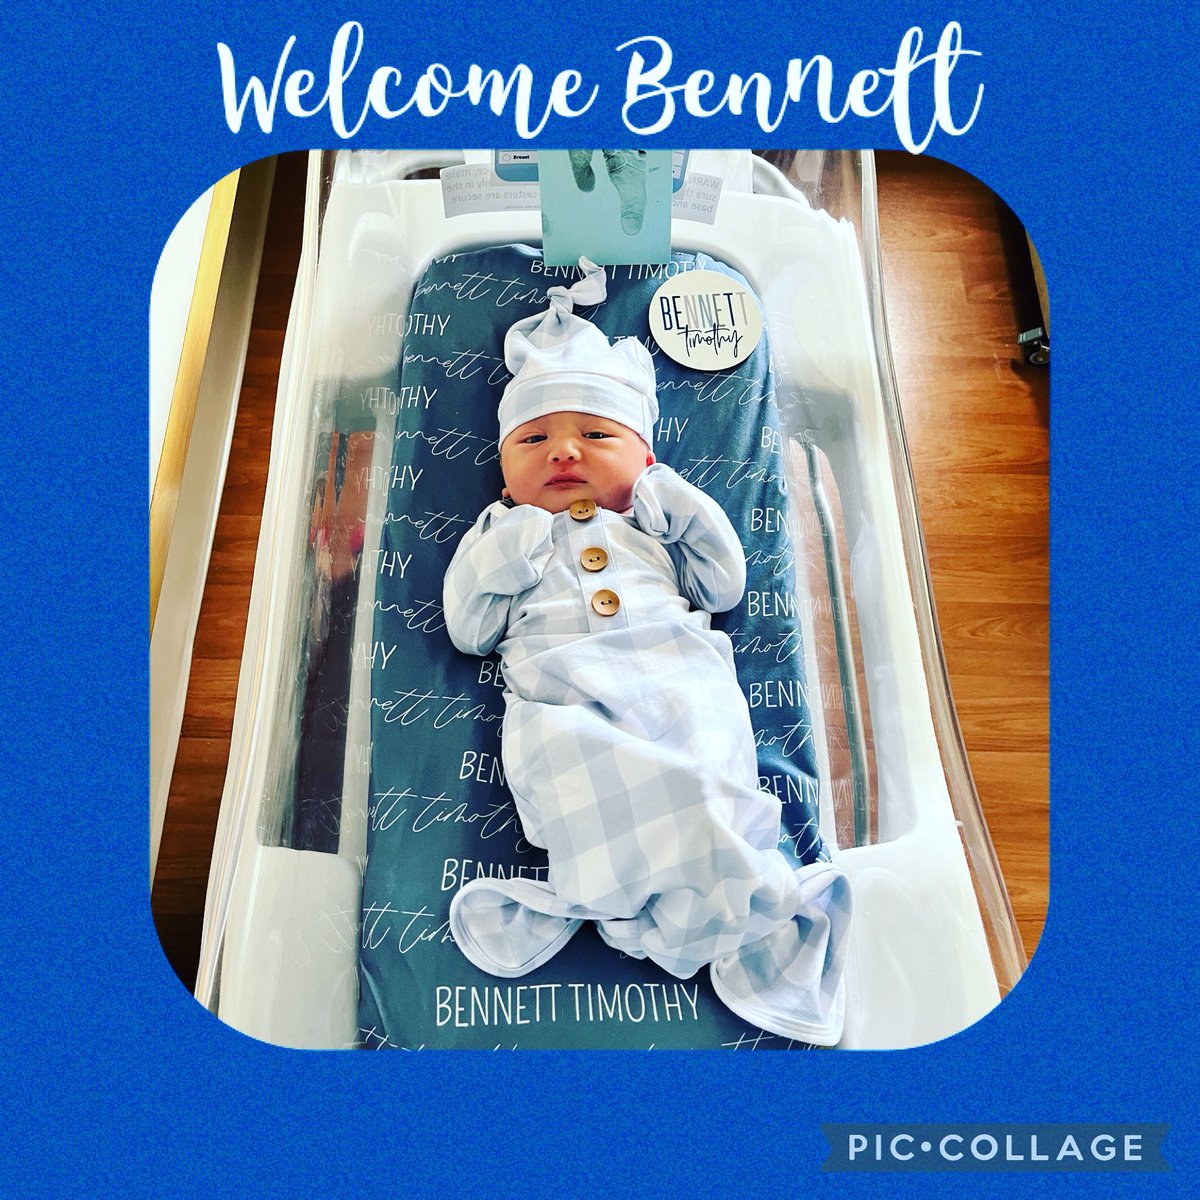 Congrats to @Silva_TJ0 and his family as they welcome the newest addition to the Trojan family, Bennett Timothy!  @SGCBoosters @SimsburyTrojans @SimsburyWrest #beuncommon